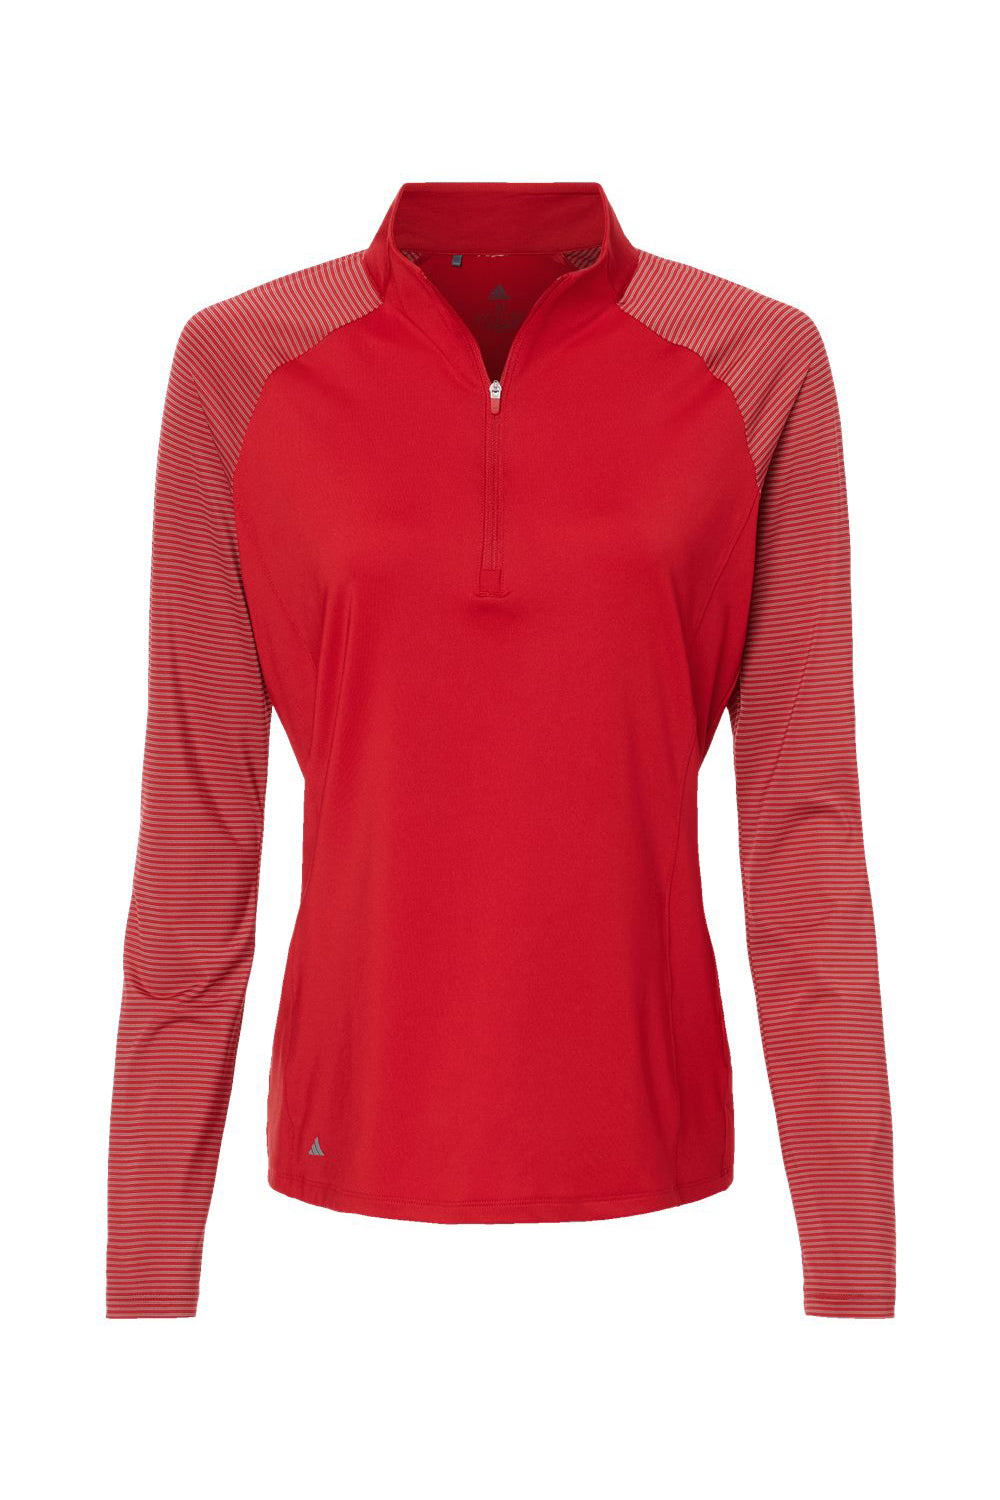 Adidas A521 Womens Stripe Block 1/4 Zip Pullover Team Power Red Flat Front